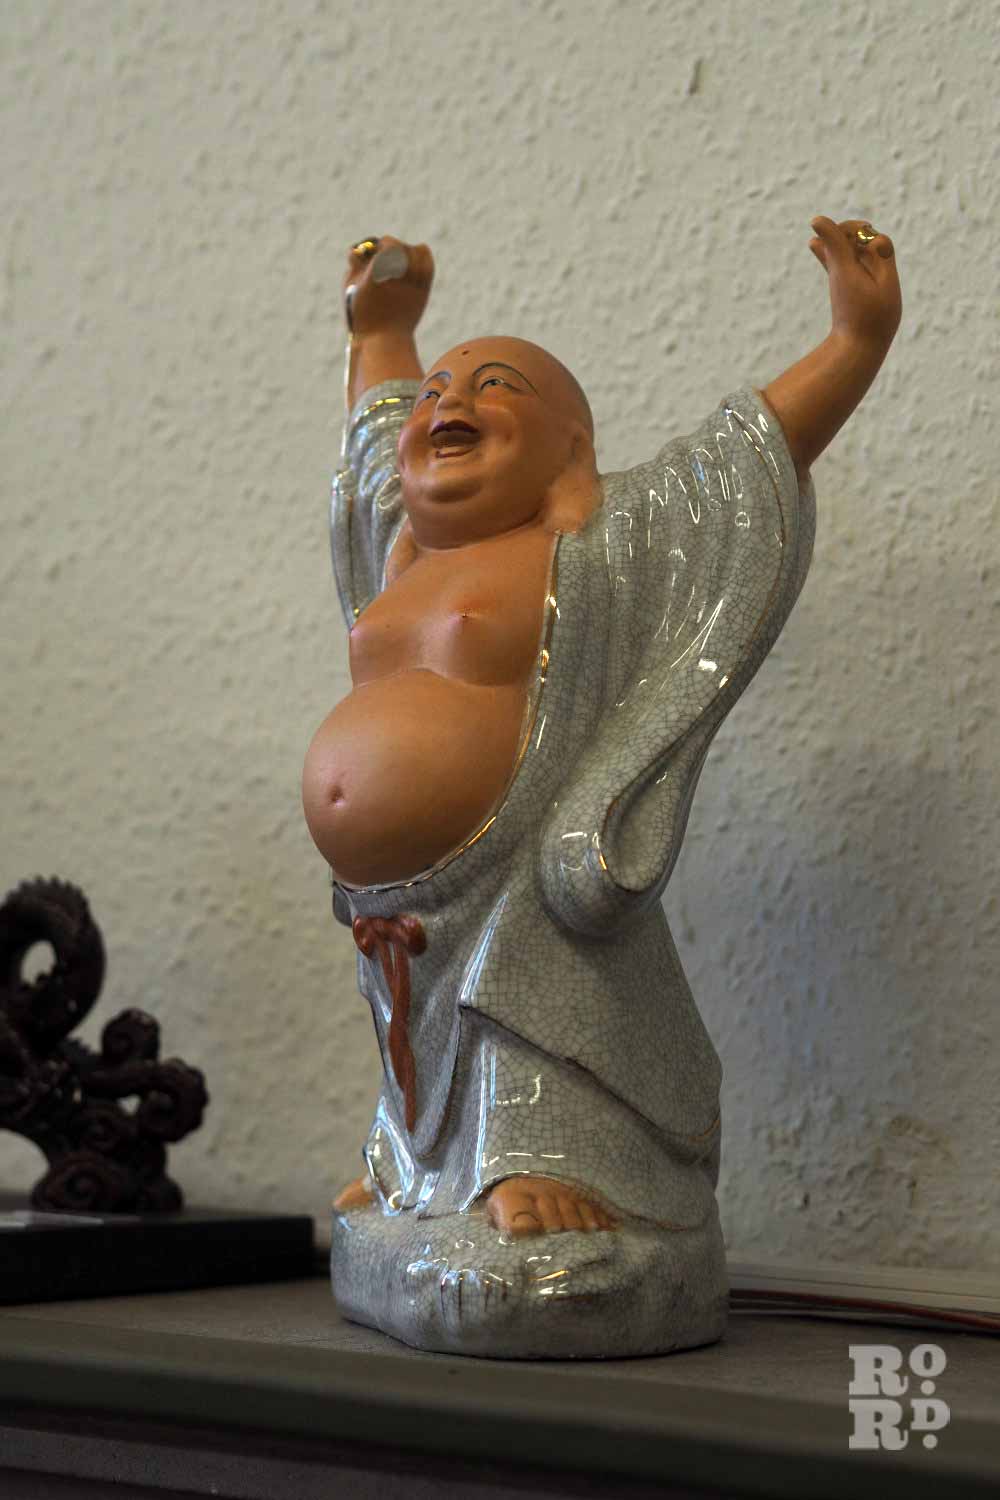 A Smiling Buddha statue in the Chinese Association of Tower Hamlets at Sailors Palace, Limehouse.